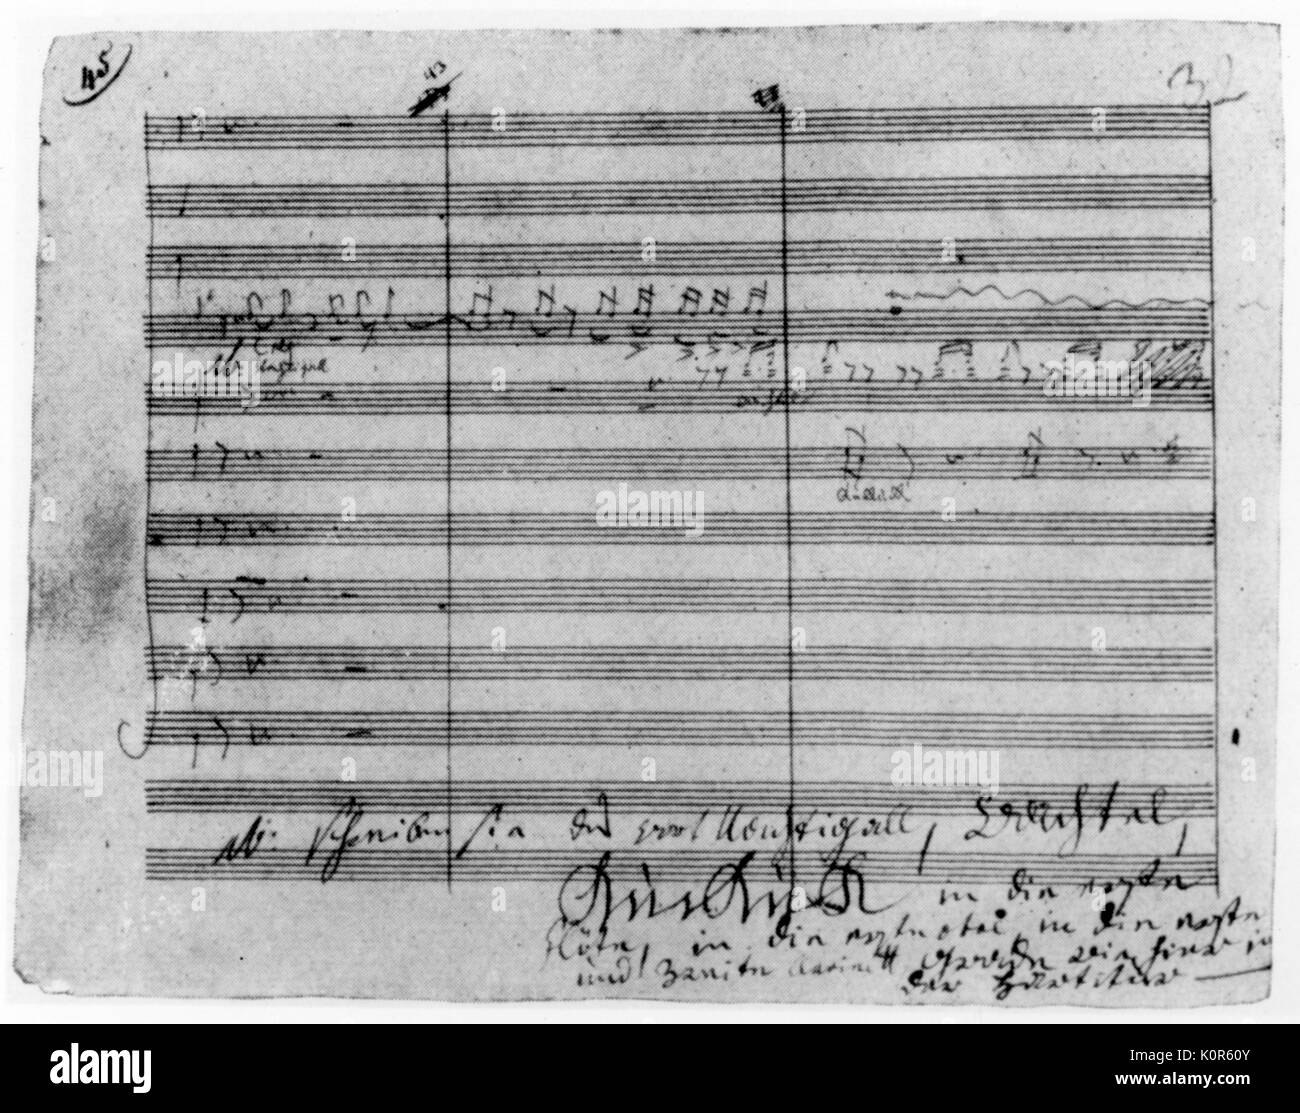 Beethoven. Part of the German composer's 6th Symphony score in Beethoven's handwriting .  Beethoven signature at end and notes in his handwriting. This is Op.68. Pastoral Symphony. 17 December  1770- 26 March 1827. Ludwig van Beethoven. Stock Photo